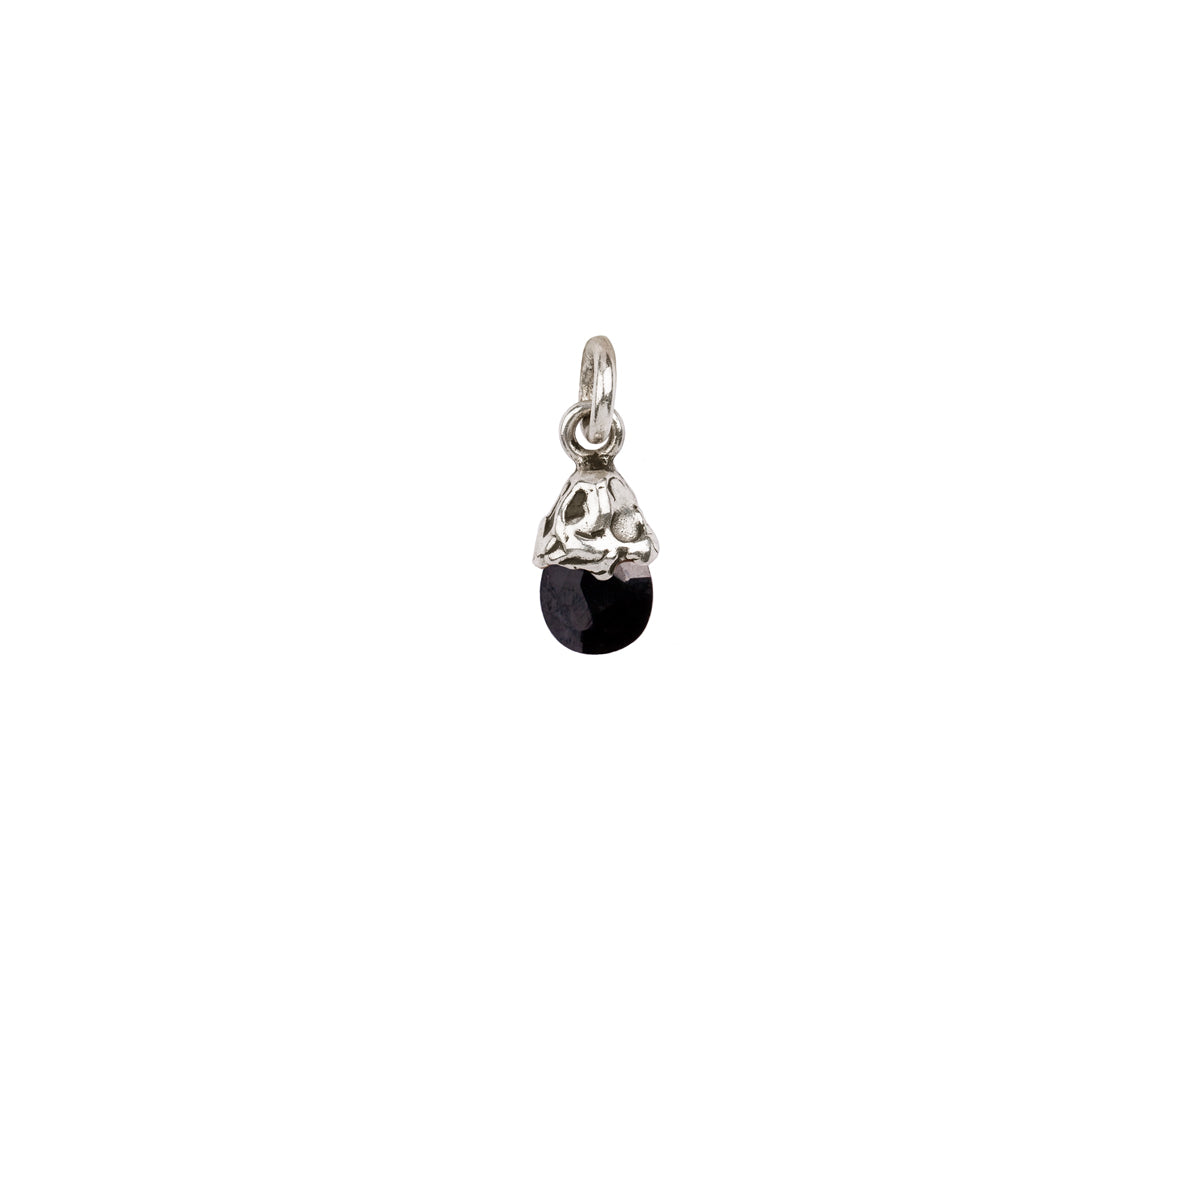 A sterling silver attraction charm representing Vitality capped with a semi precious stone.